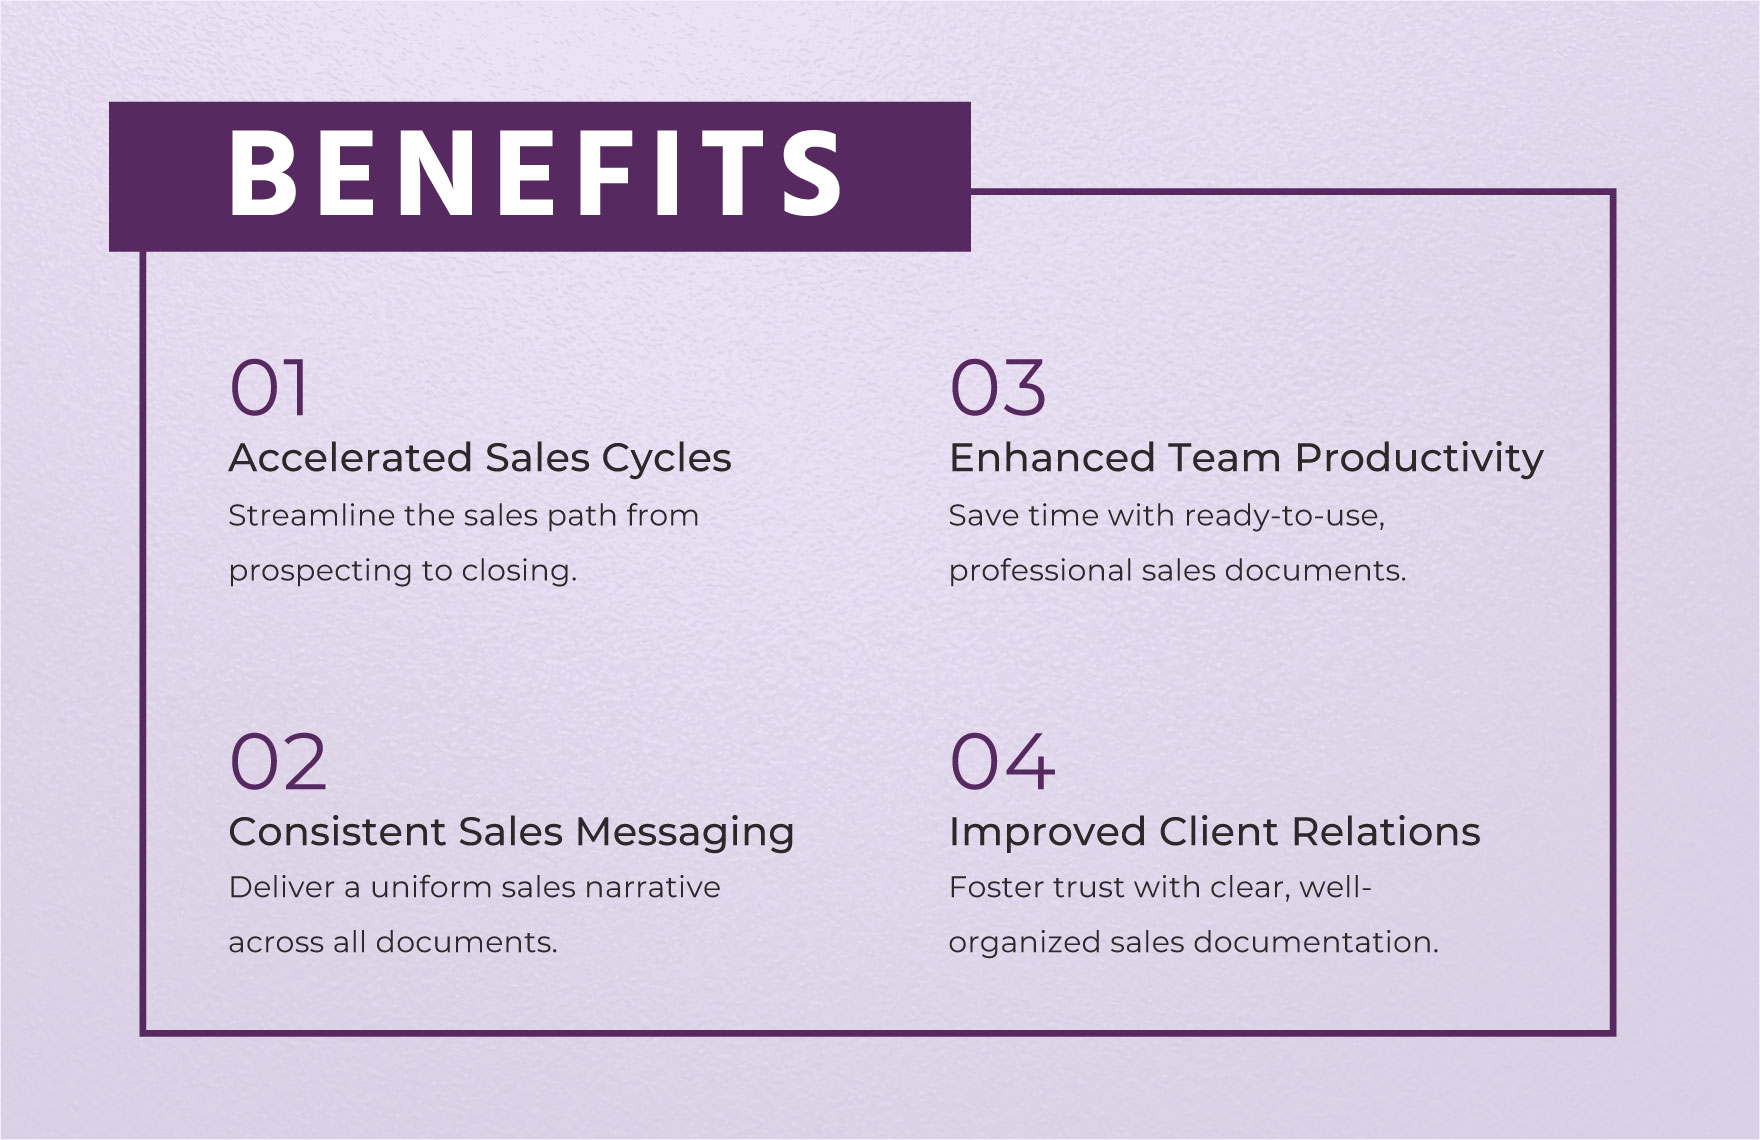 Sales Lead Retention Strategy Resolution Template